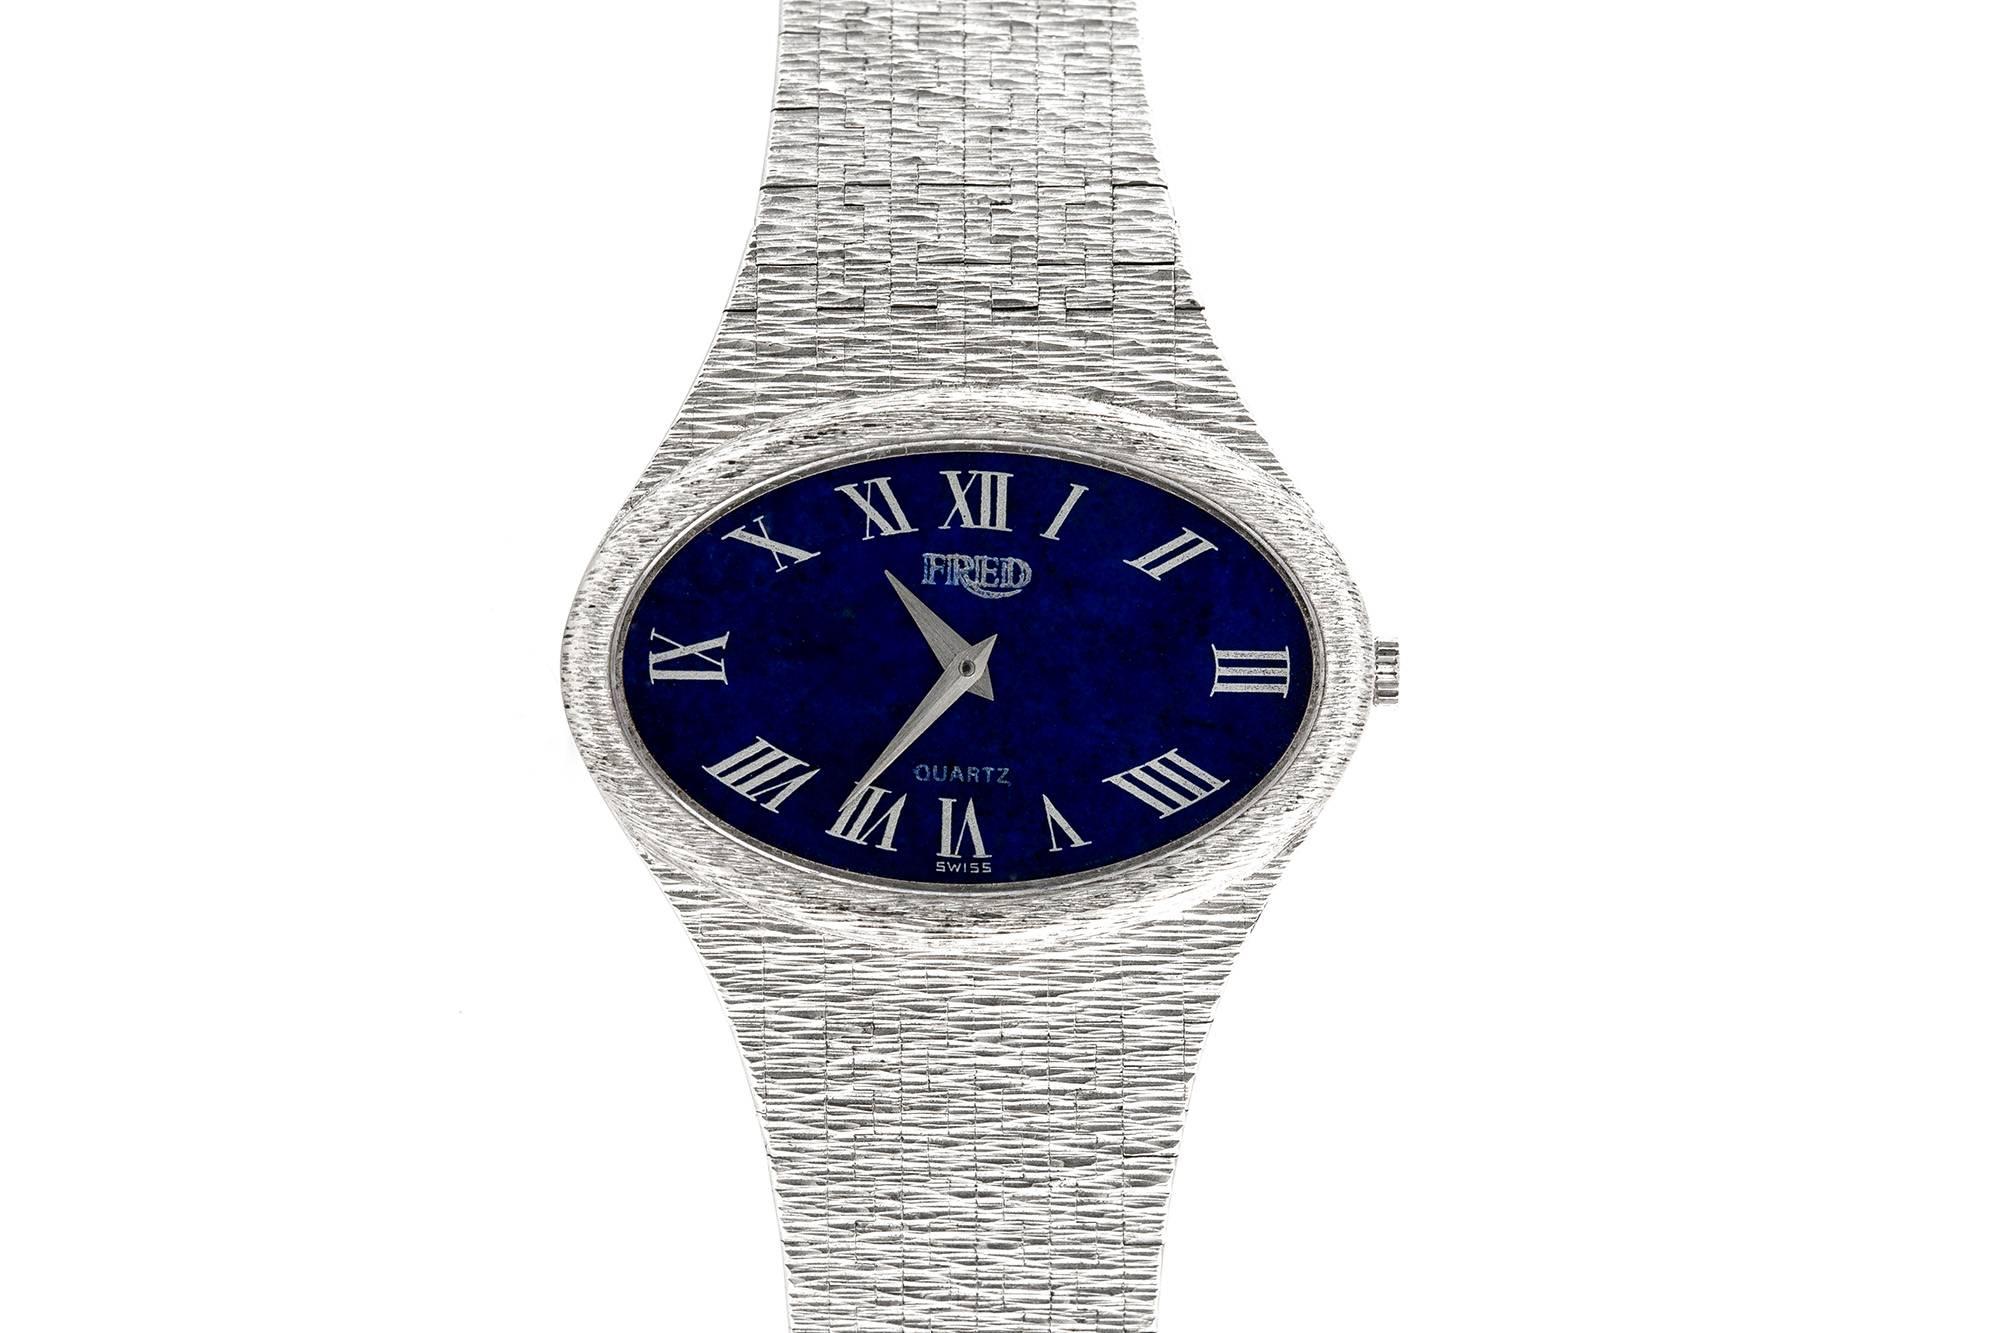 Fred watch finely crafted in 18k white gold, Quartz movement. Case diameter 35mm.